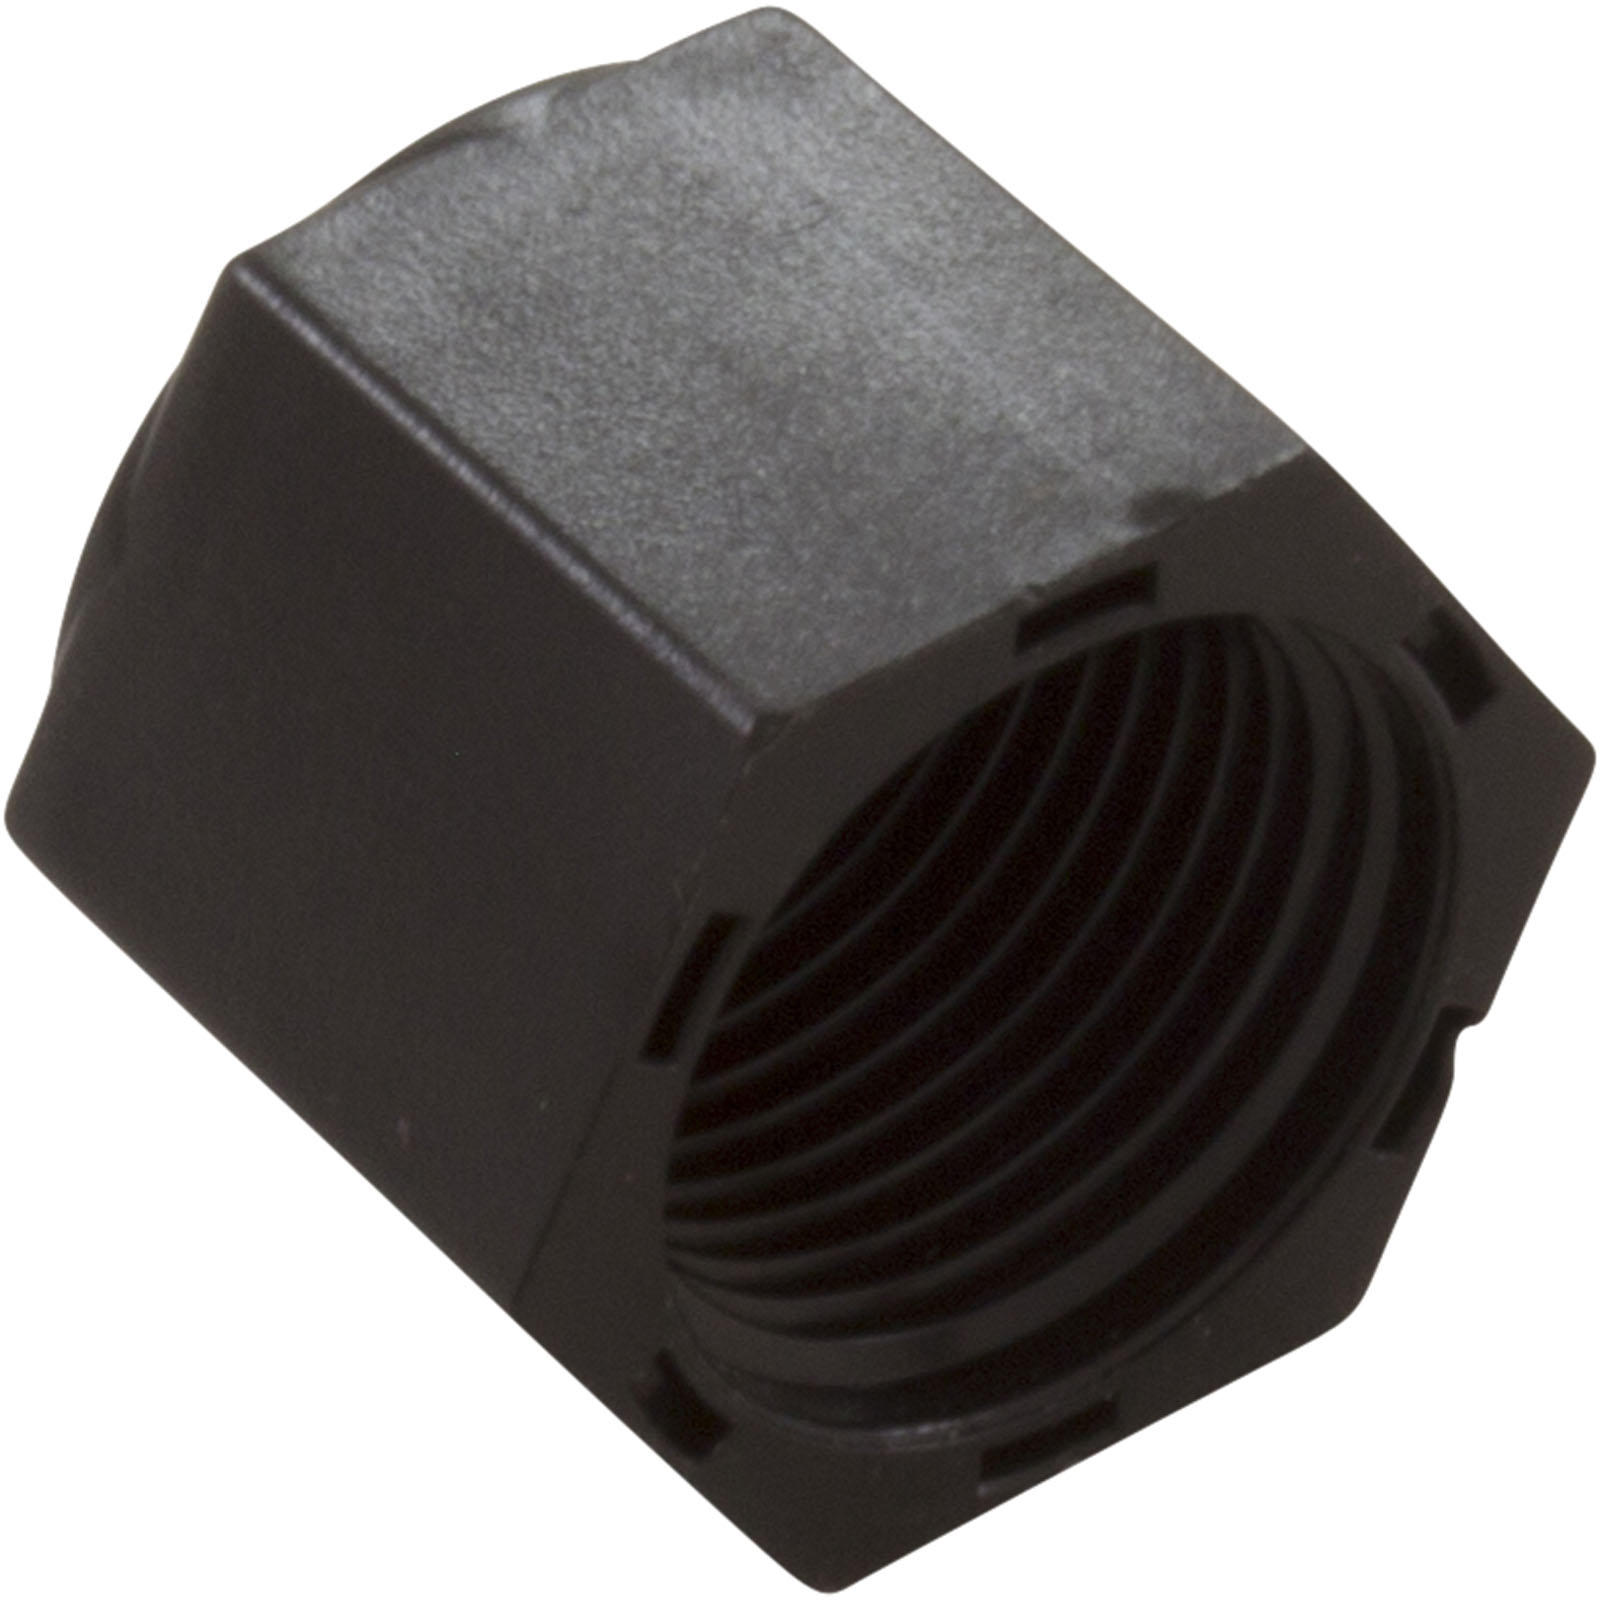 Astral Products, Inc. Drain Cap, Astral, Persius 1800 Series, Top 16"/20"/24"